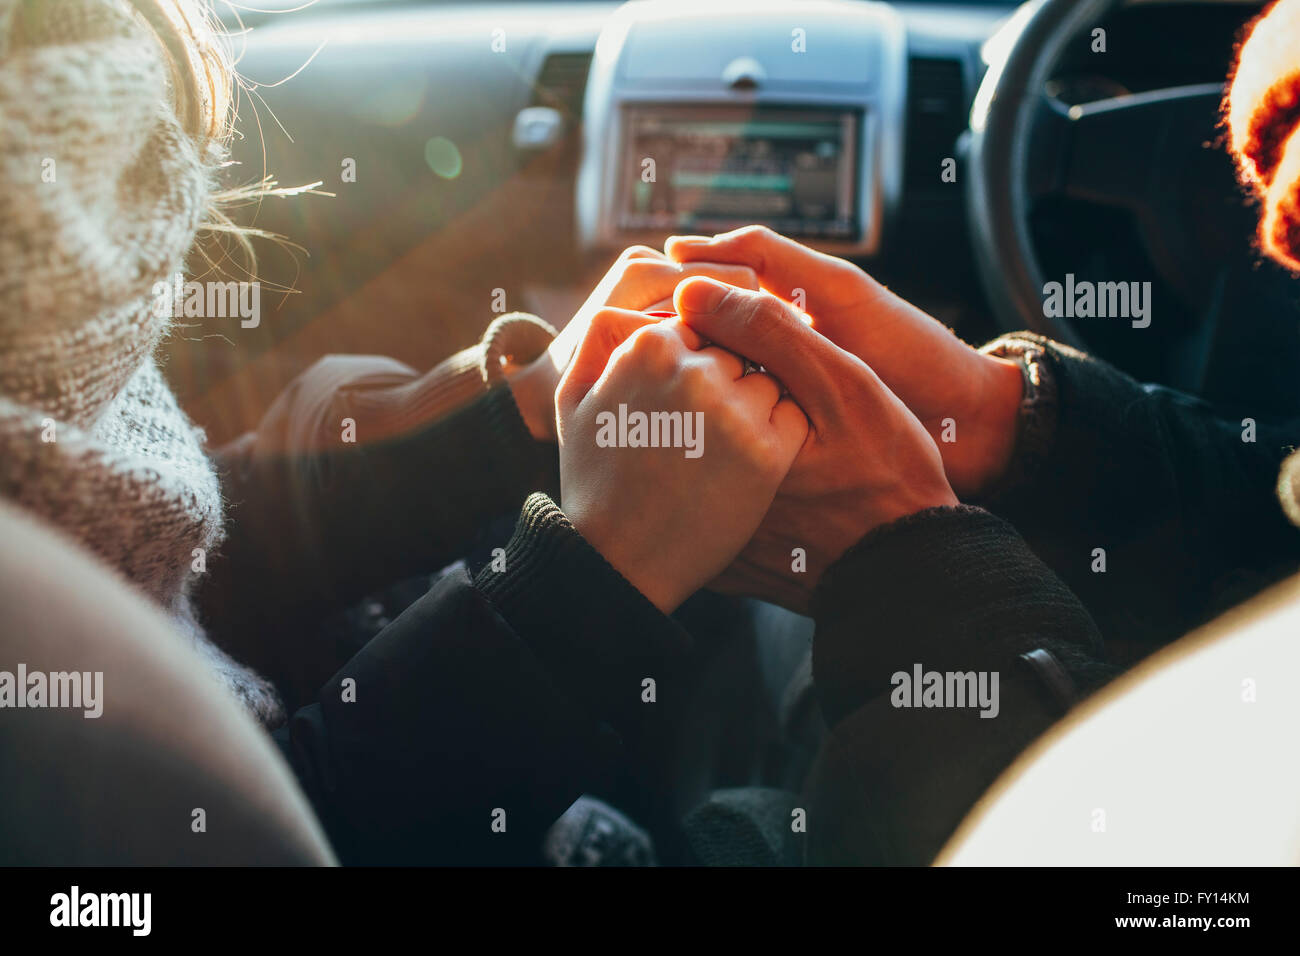 Cropped image of couple holding hands in car Stock Photo